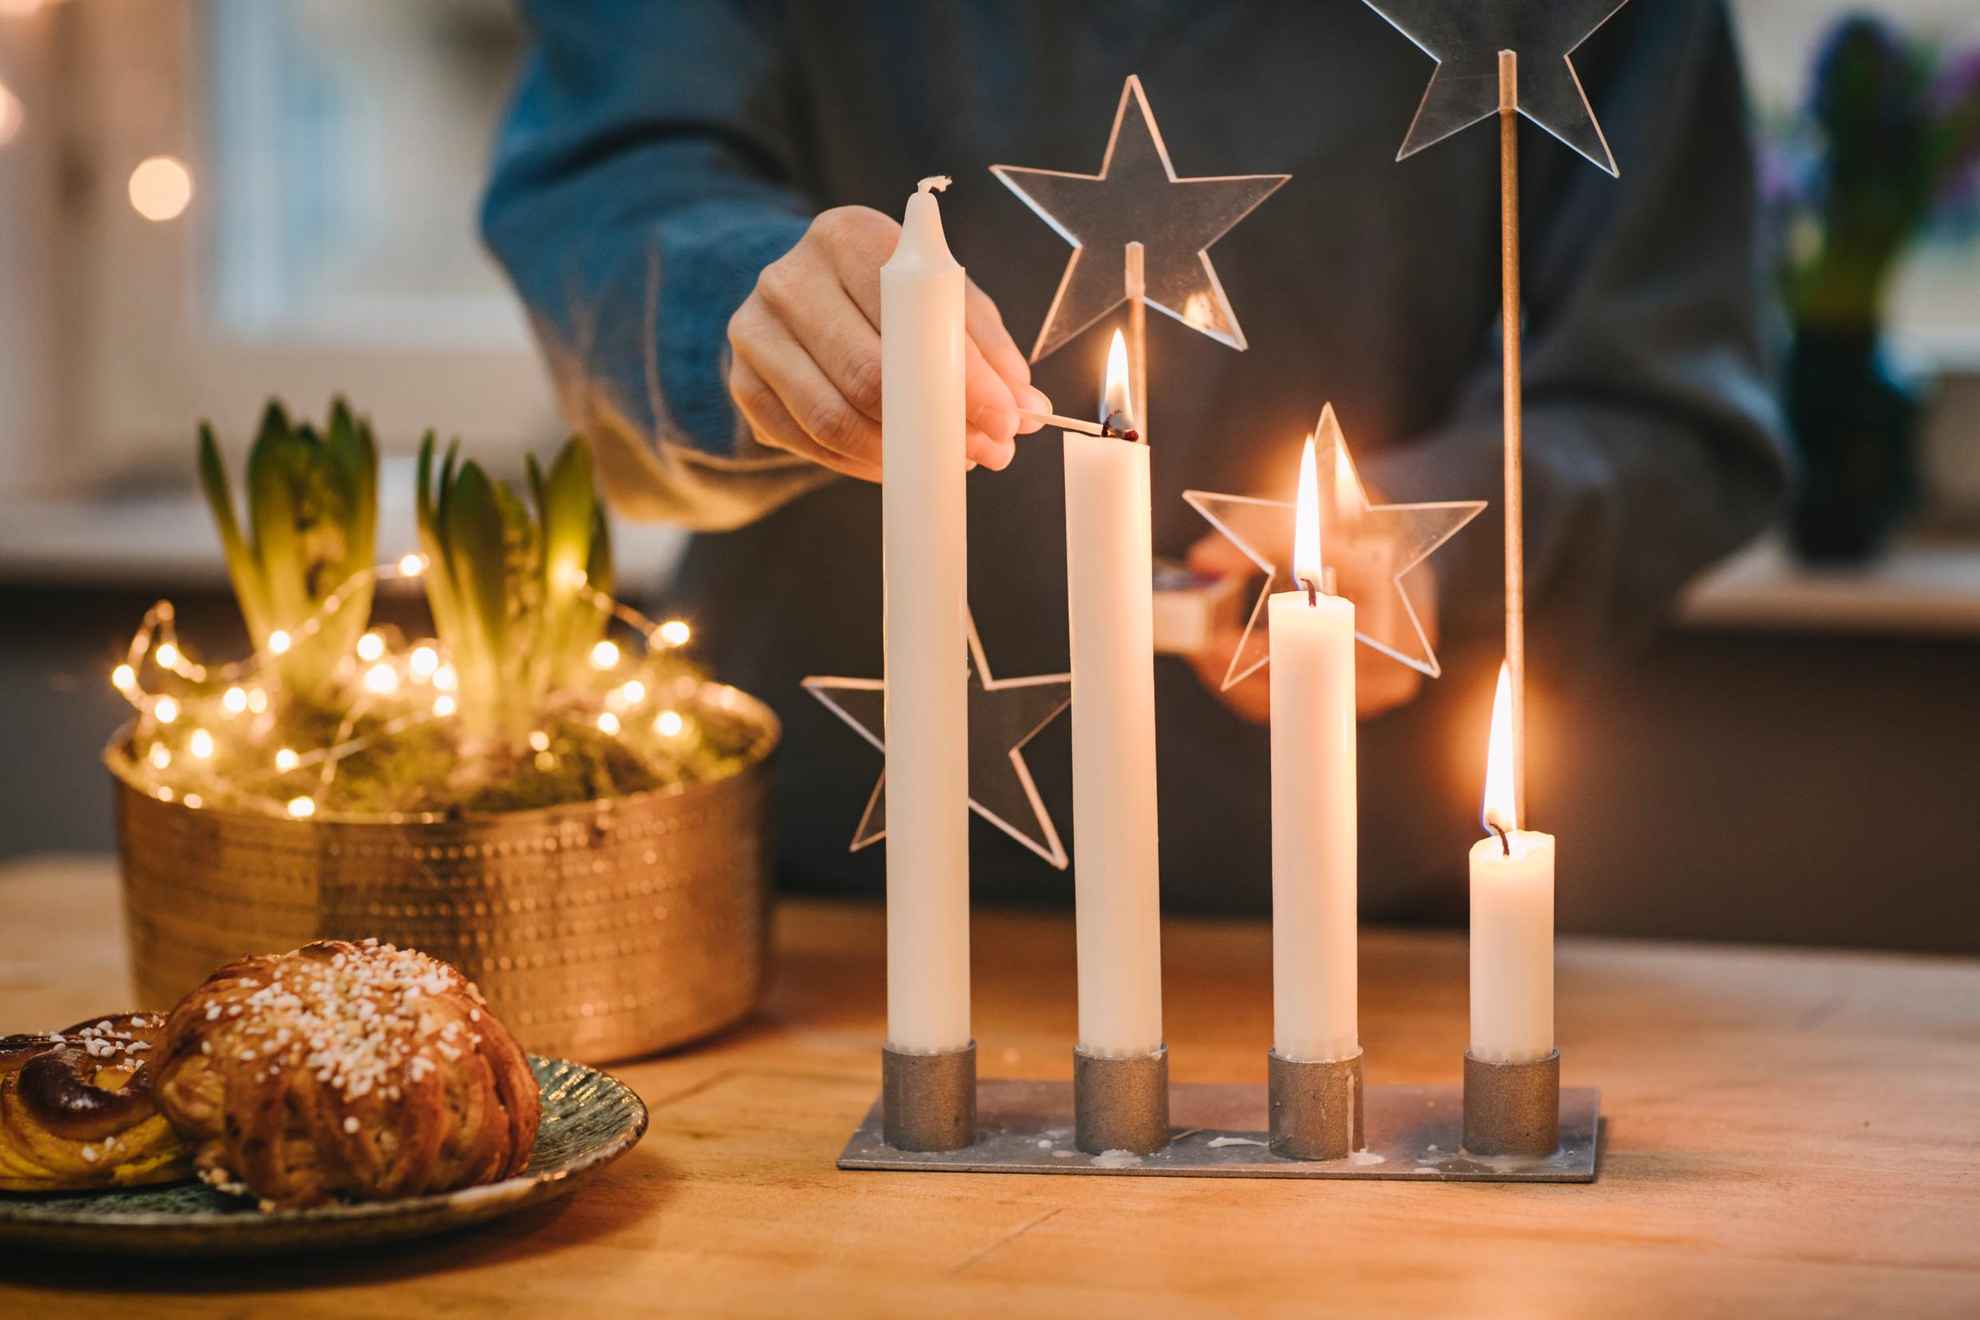 Person lighting candles for advent ahead of Christmas.